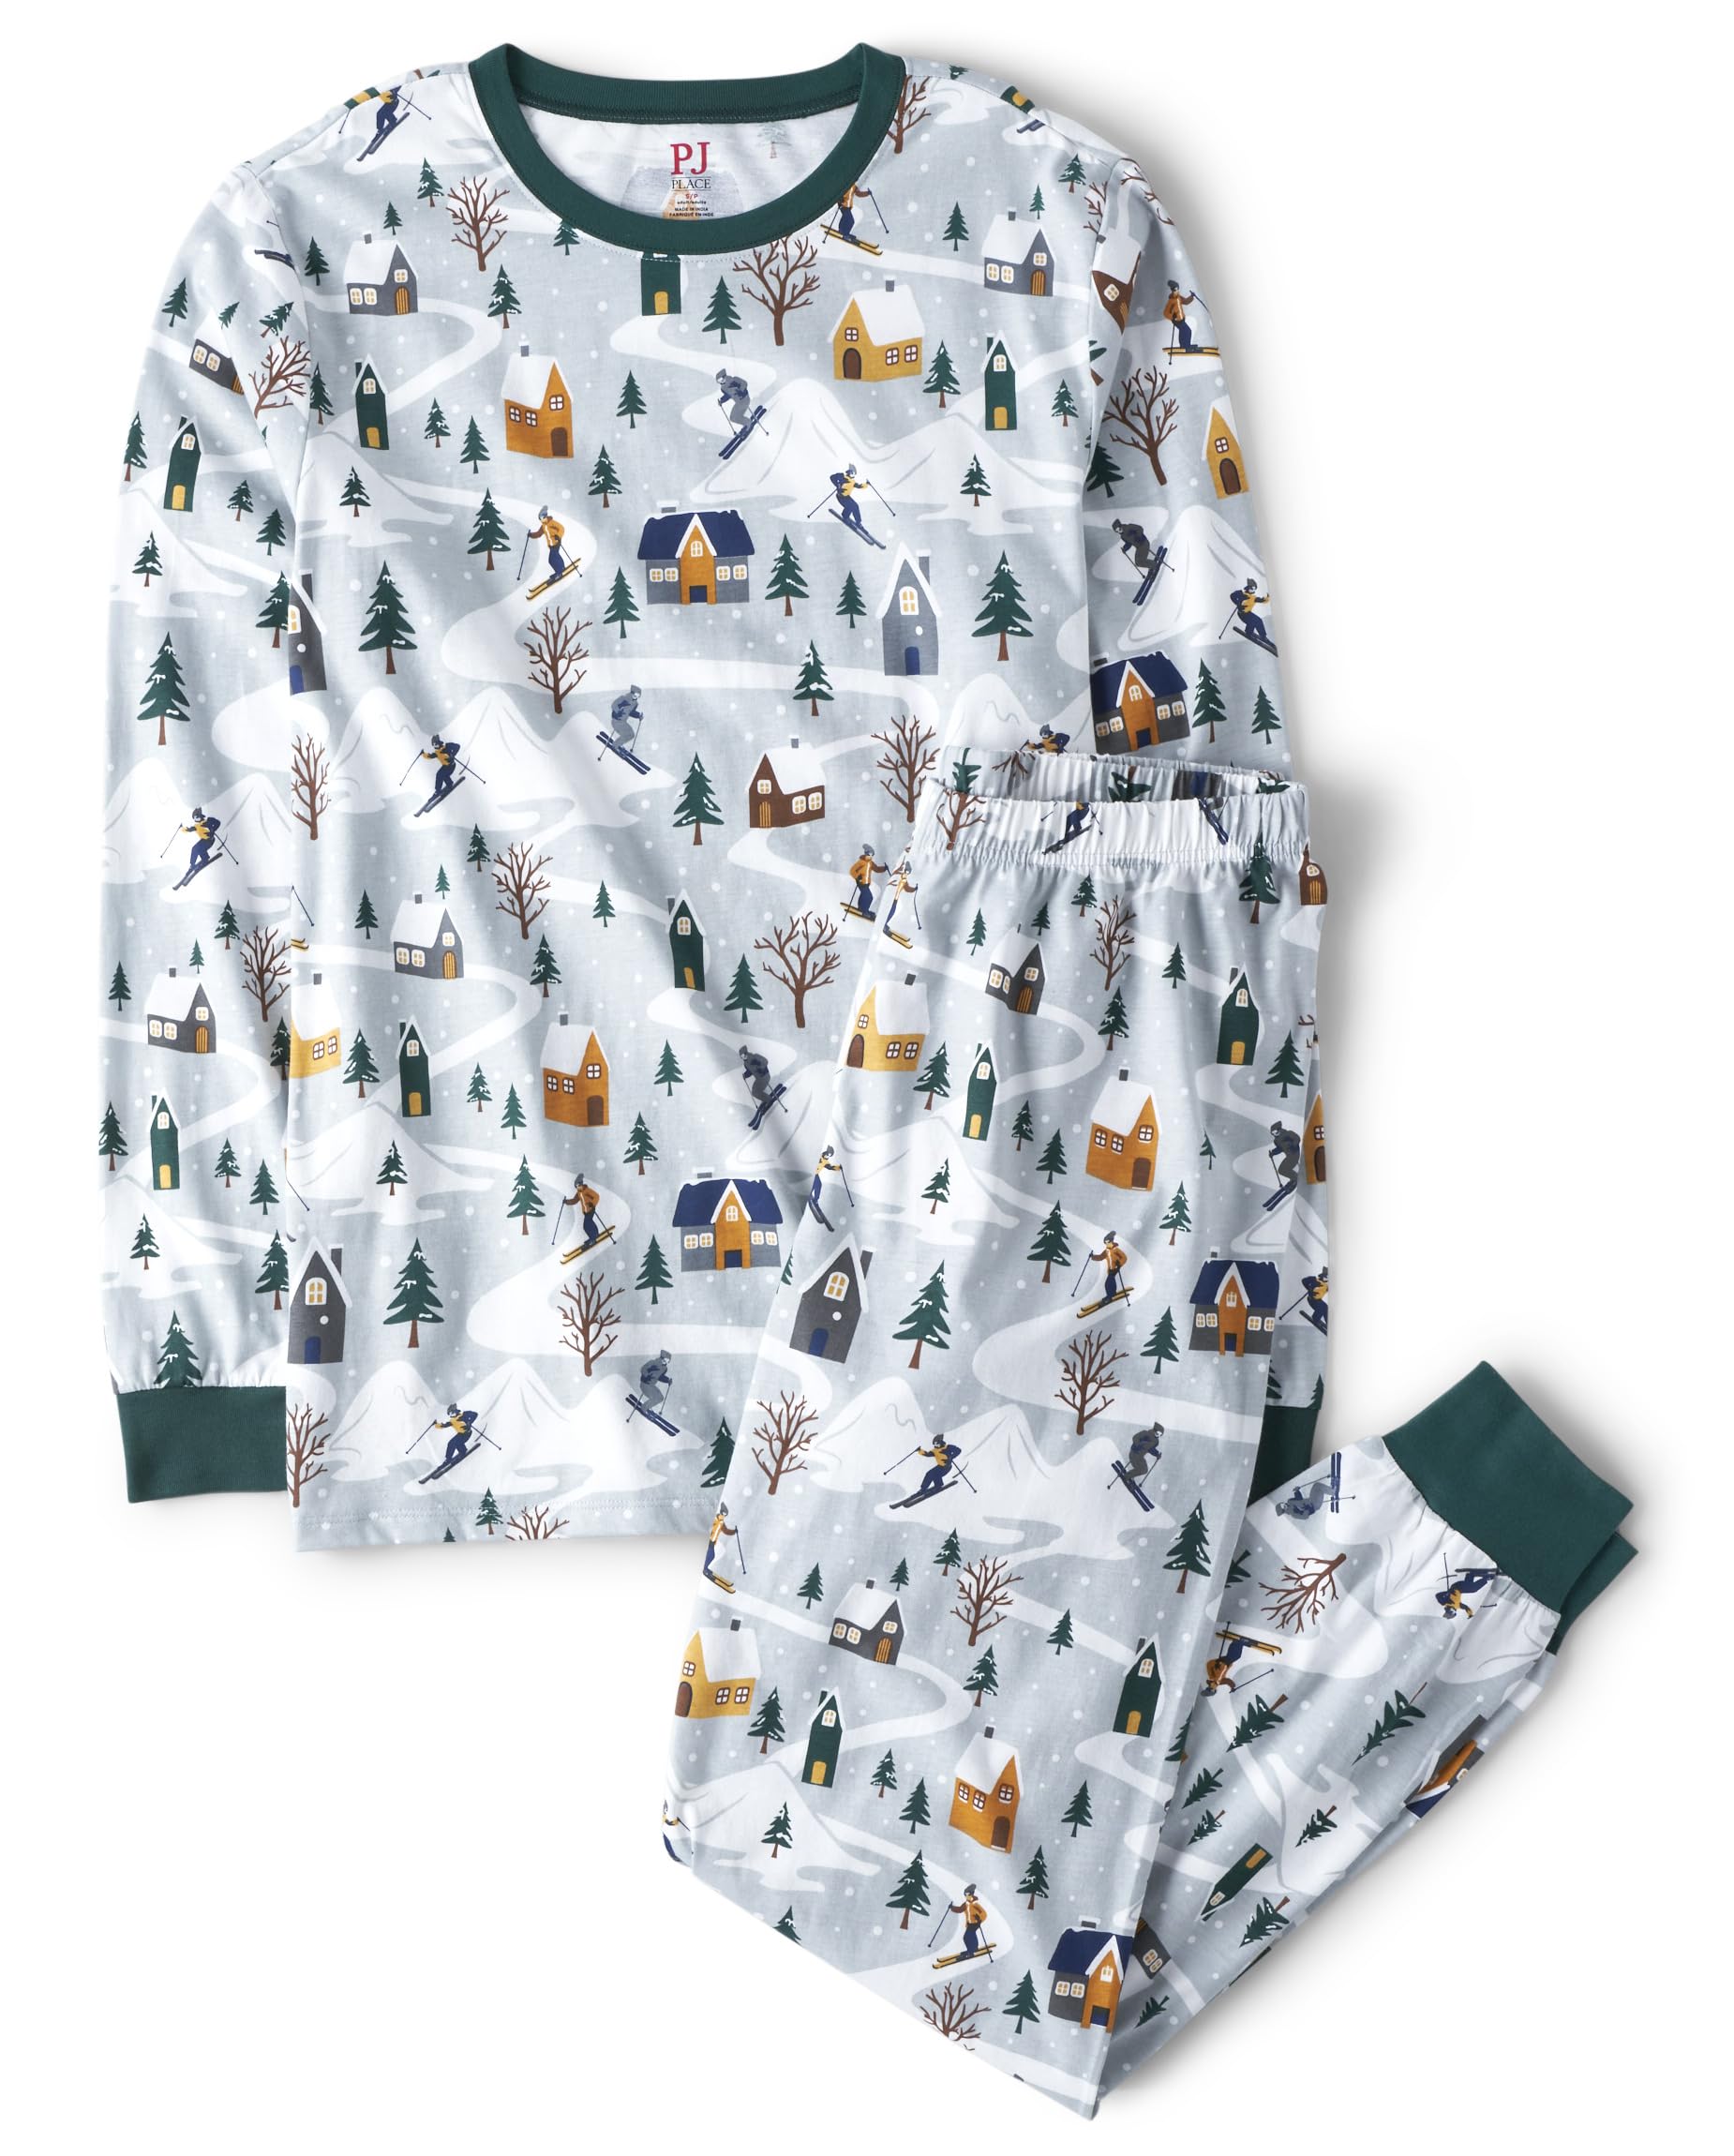 The Children's Place Group 1-Family Matching, Christmas Pajama Sets, Cotton, Blue Ski